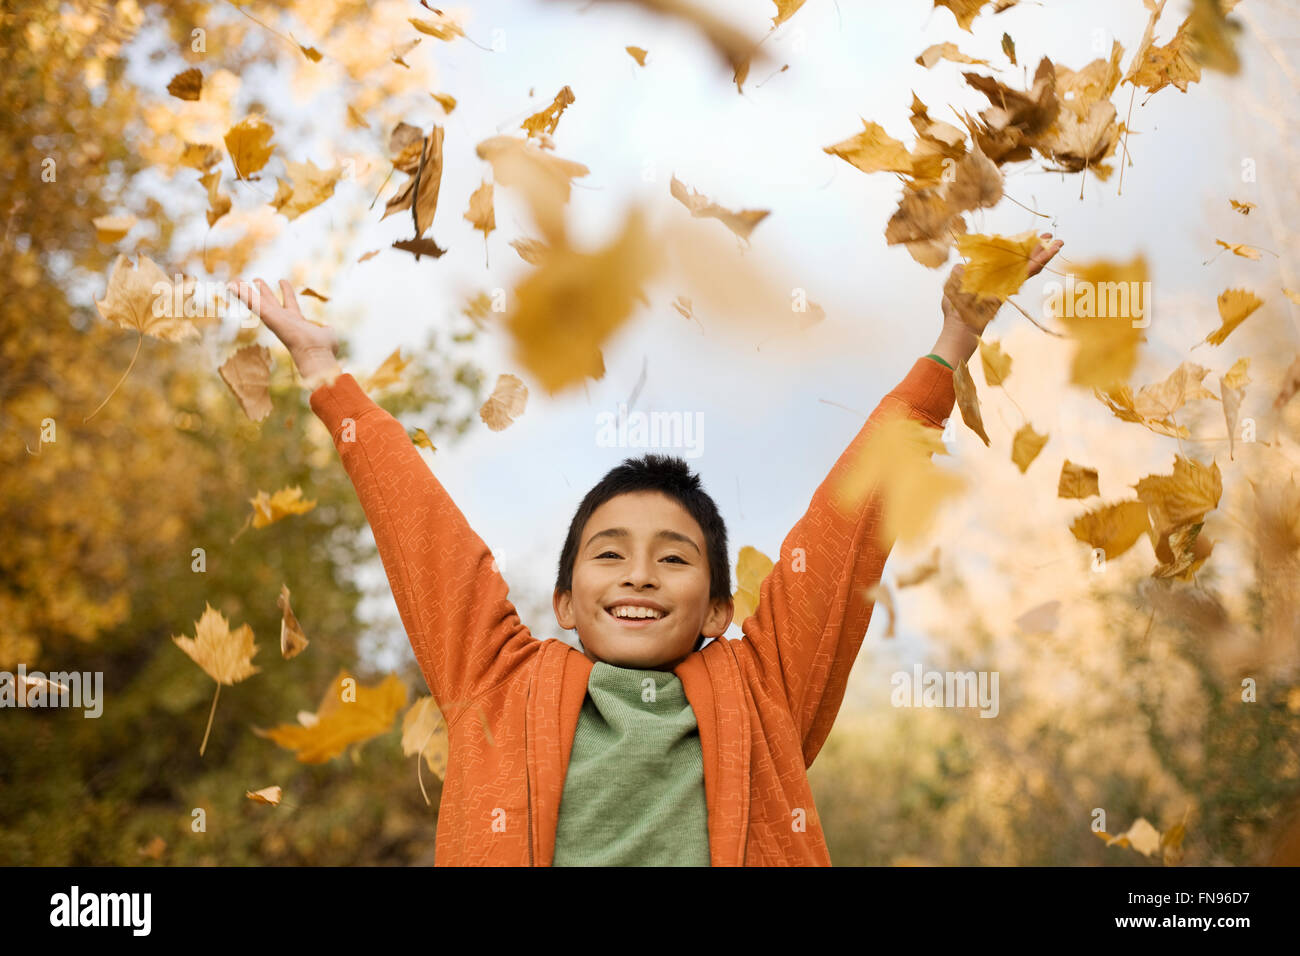 A boy throwing handfuls of fallen autumn leaves in the air Stock Photo